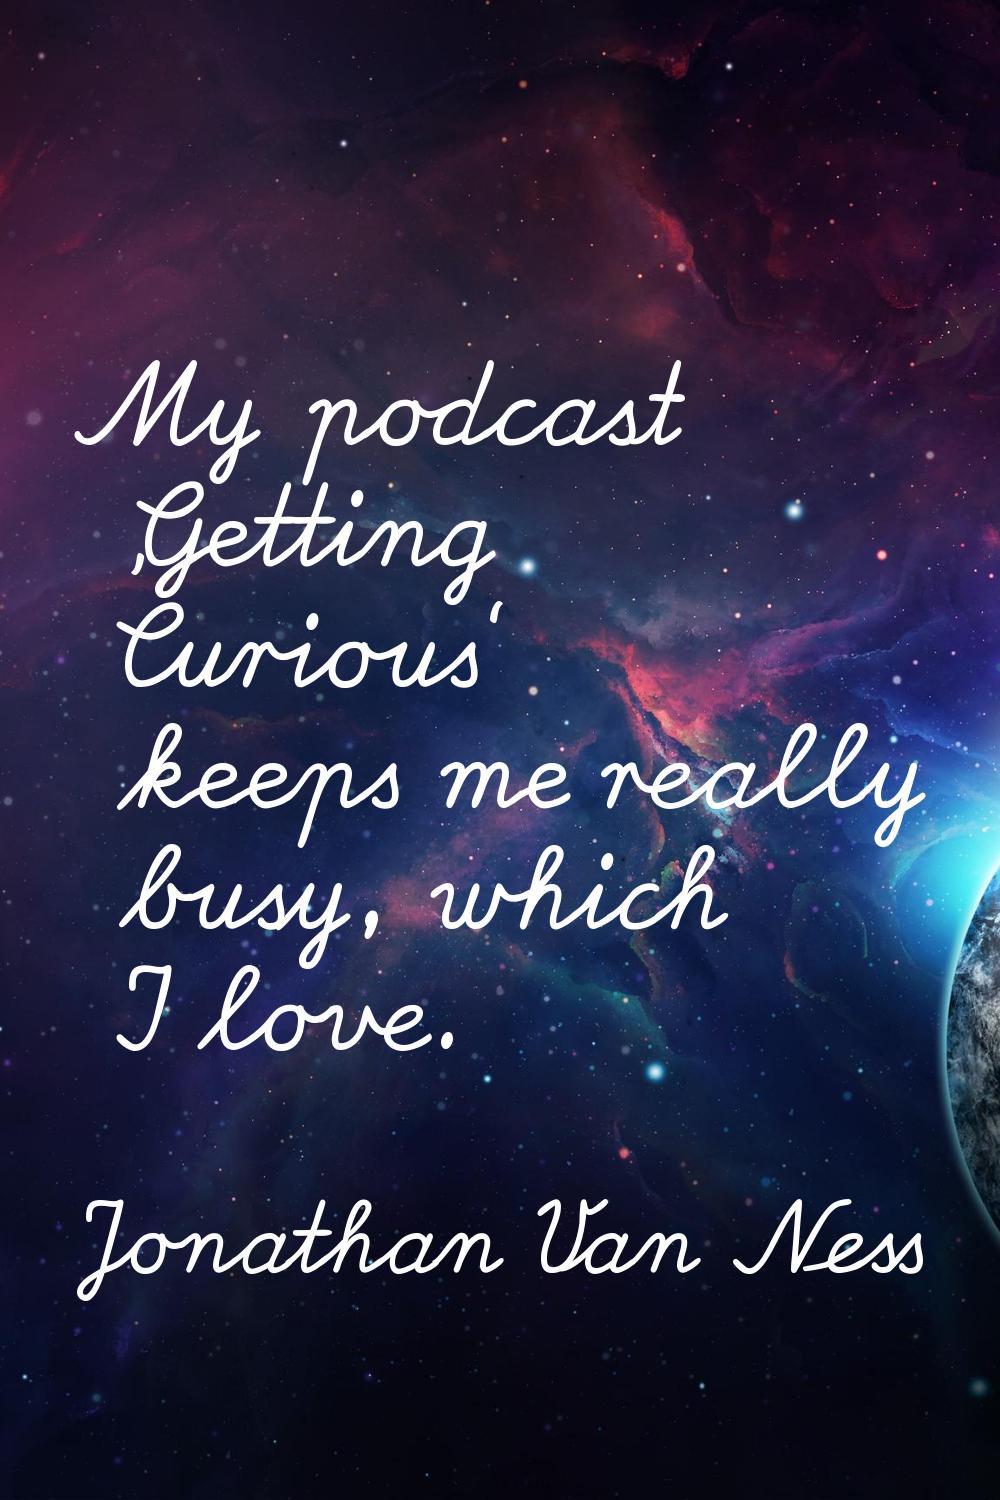 My podcast 'Getting Curious' keeps me really busy, which I love.